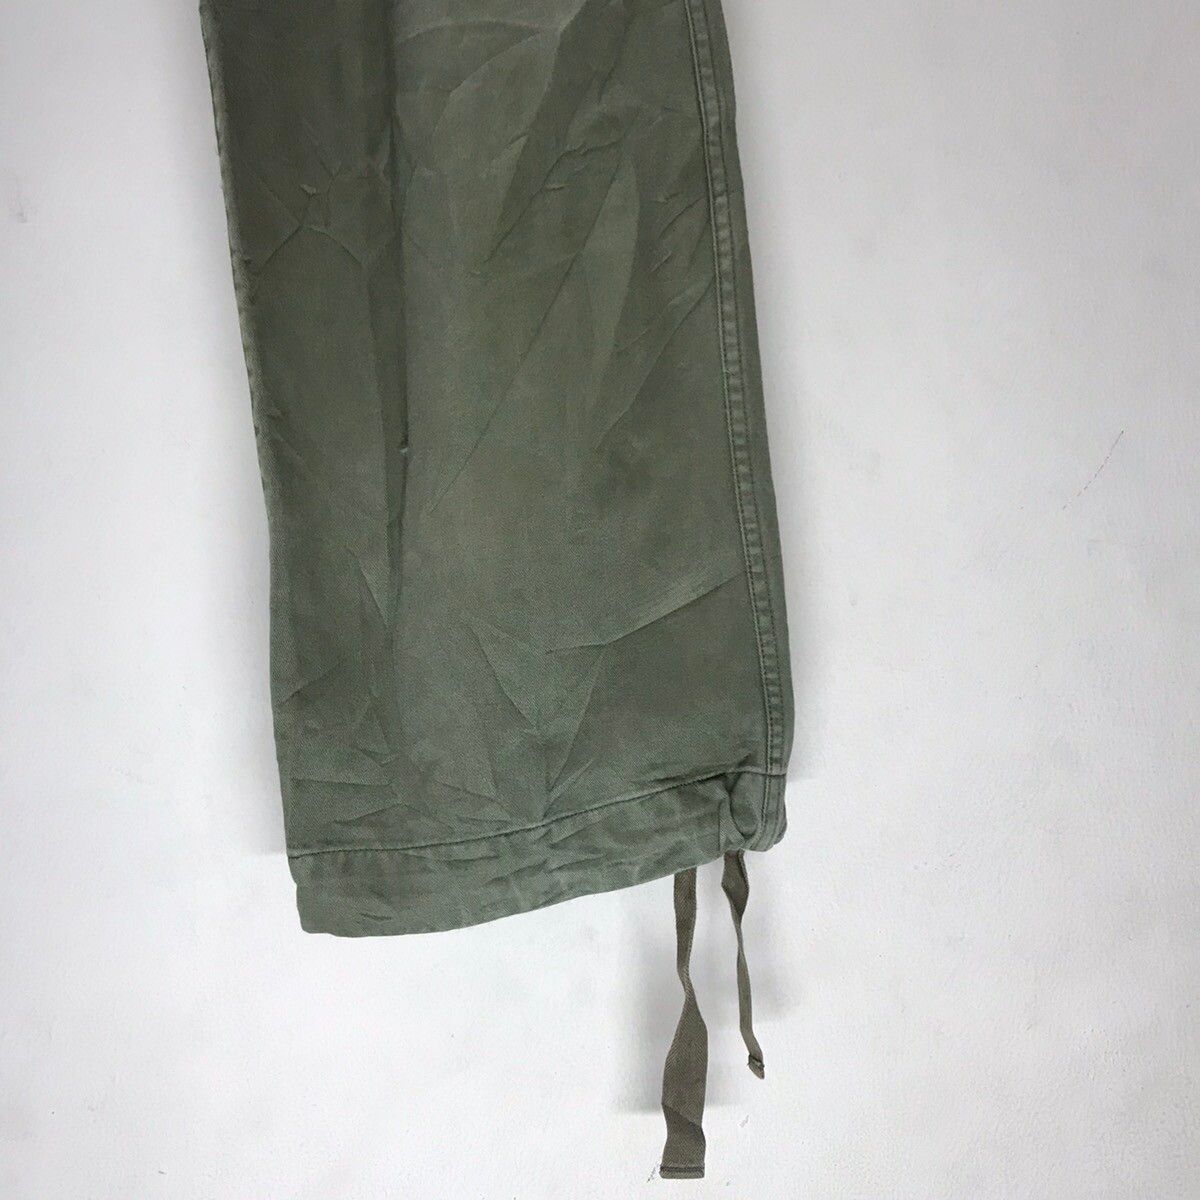 Margaret Howell MHL by Margaret Howell Cargo Pants Funtion And Utility Size US 34 / EU 50 - 5 Thumbnail